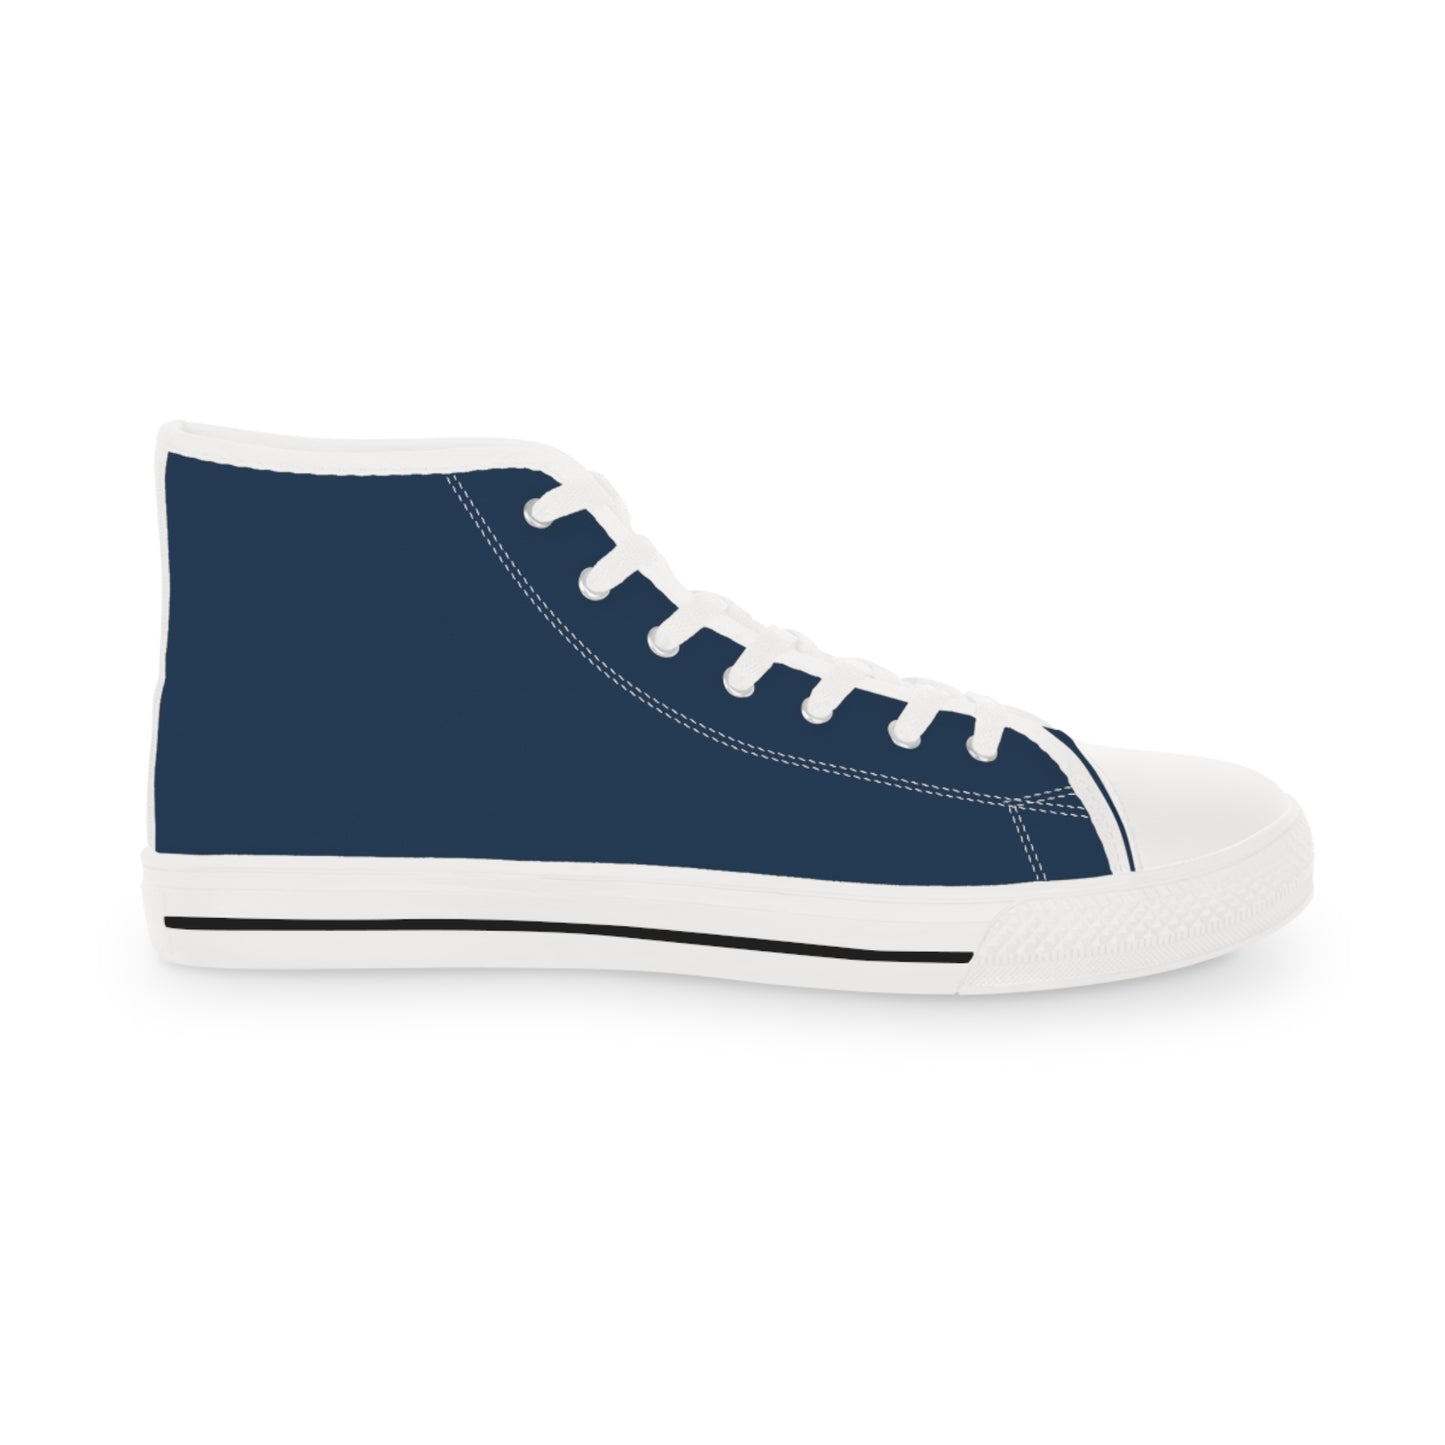 Men's Canvas High Top Solid Color Sneakers - Ink Blue US 14 White sole